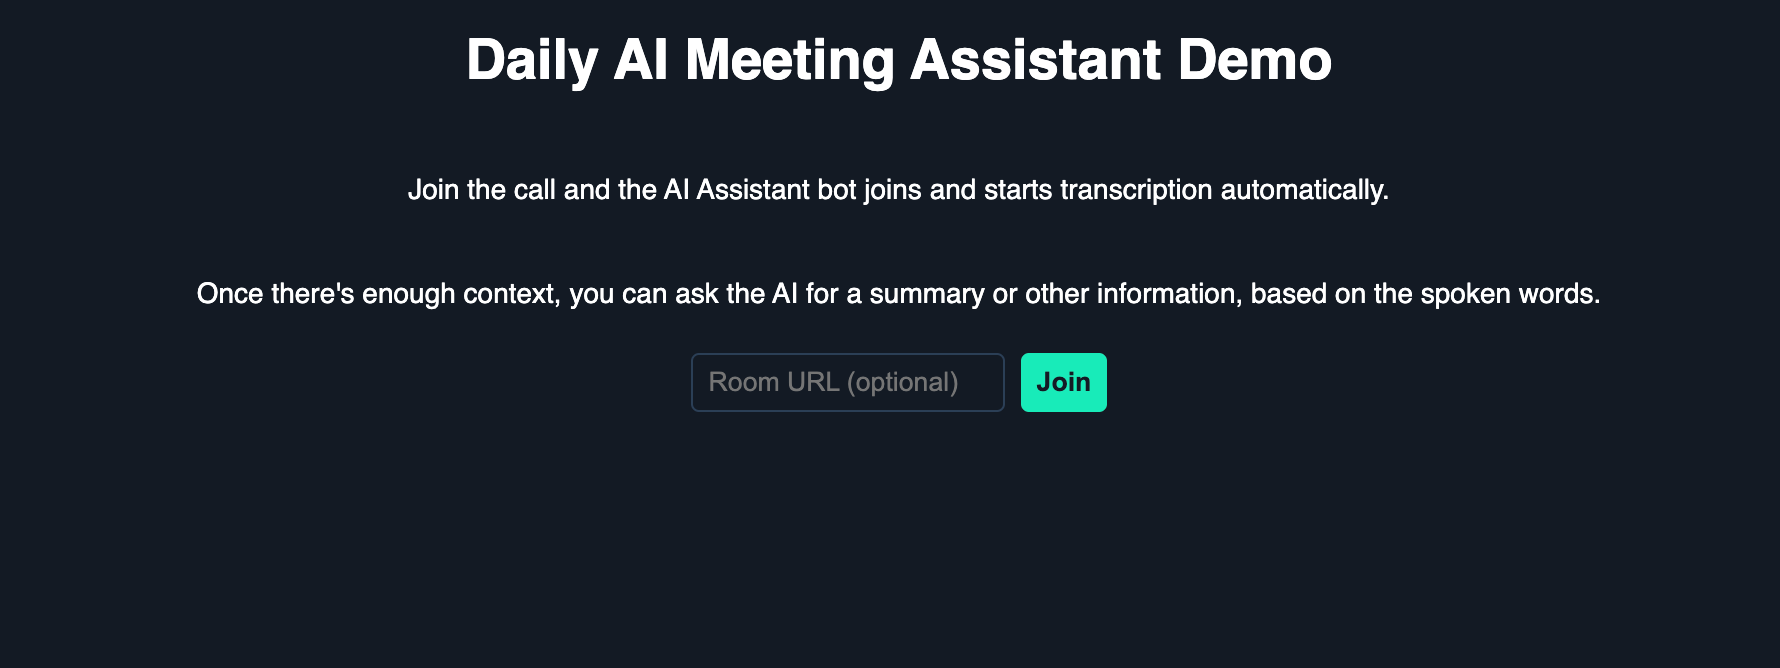 Daily AI meeting assistant demo landing page